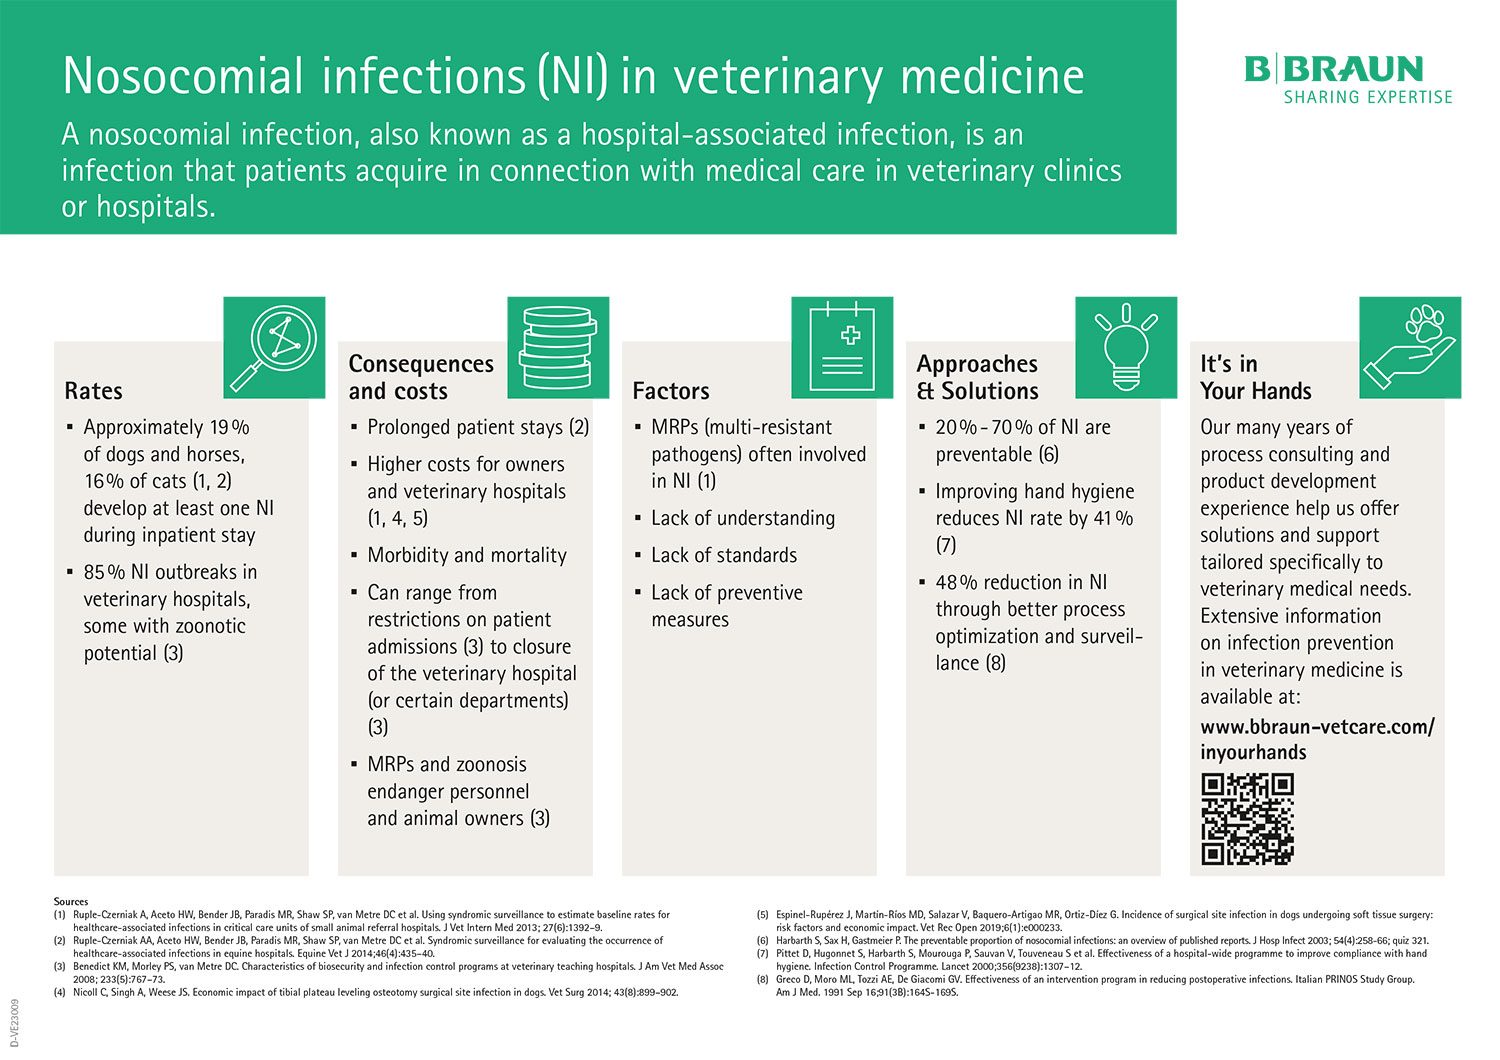 Fact sheet: Nosocomial infections (NI) in veterinary medicine